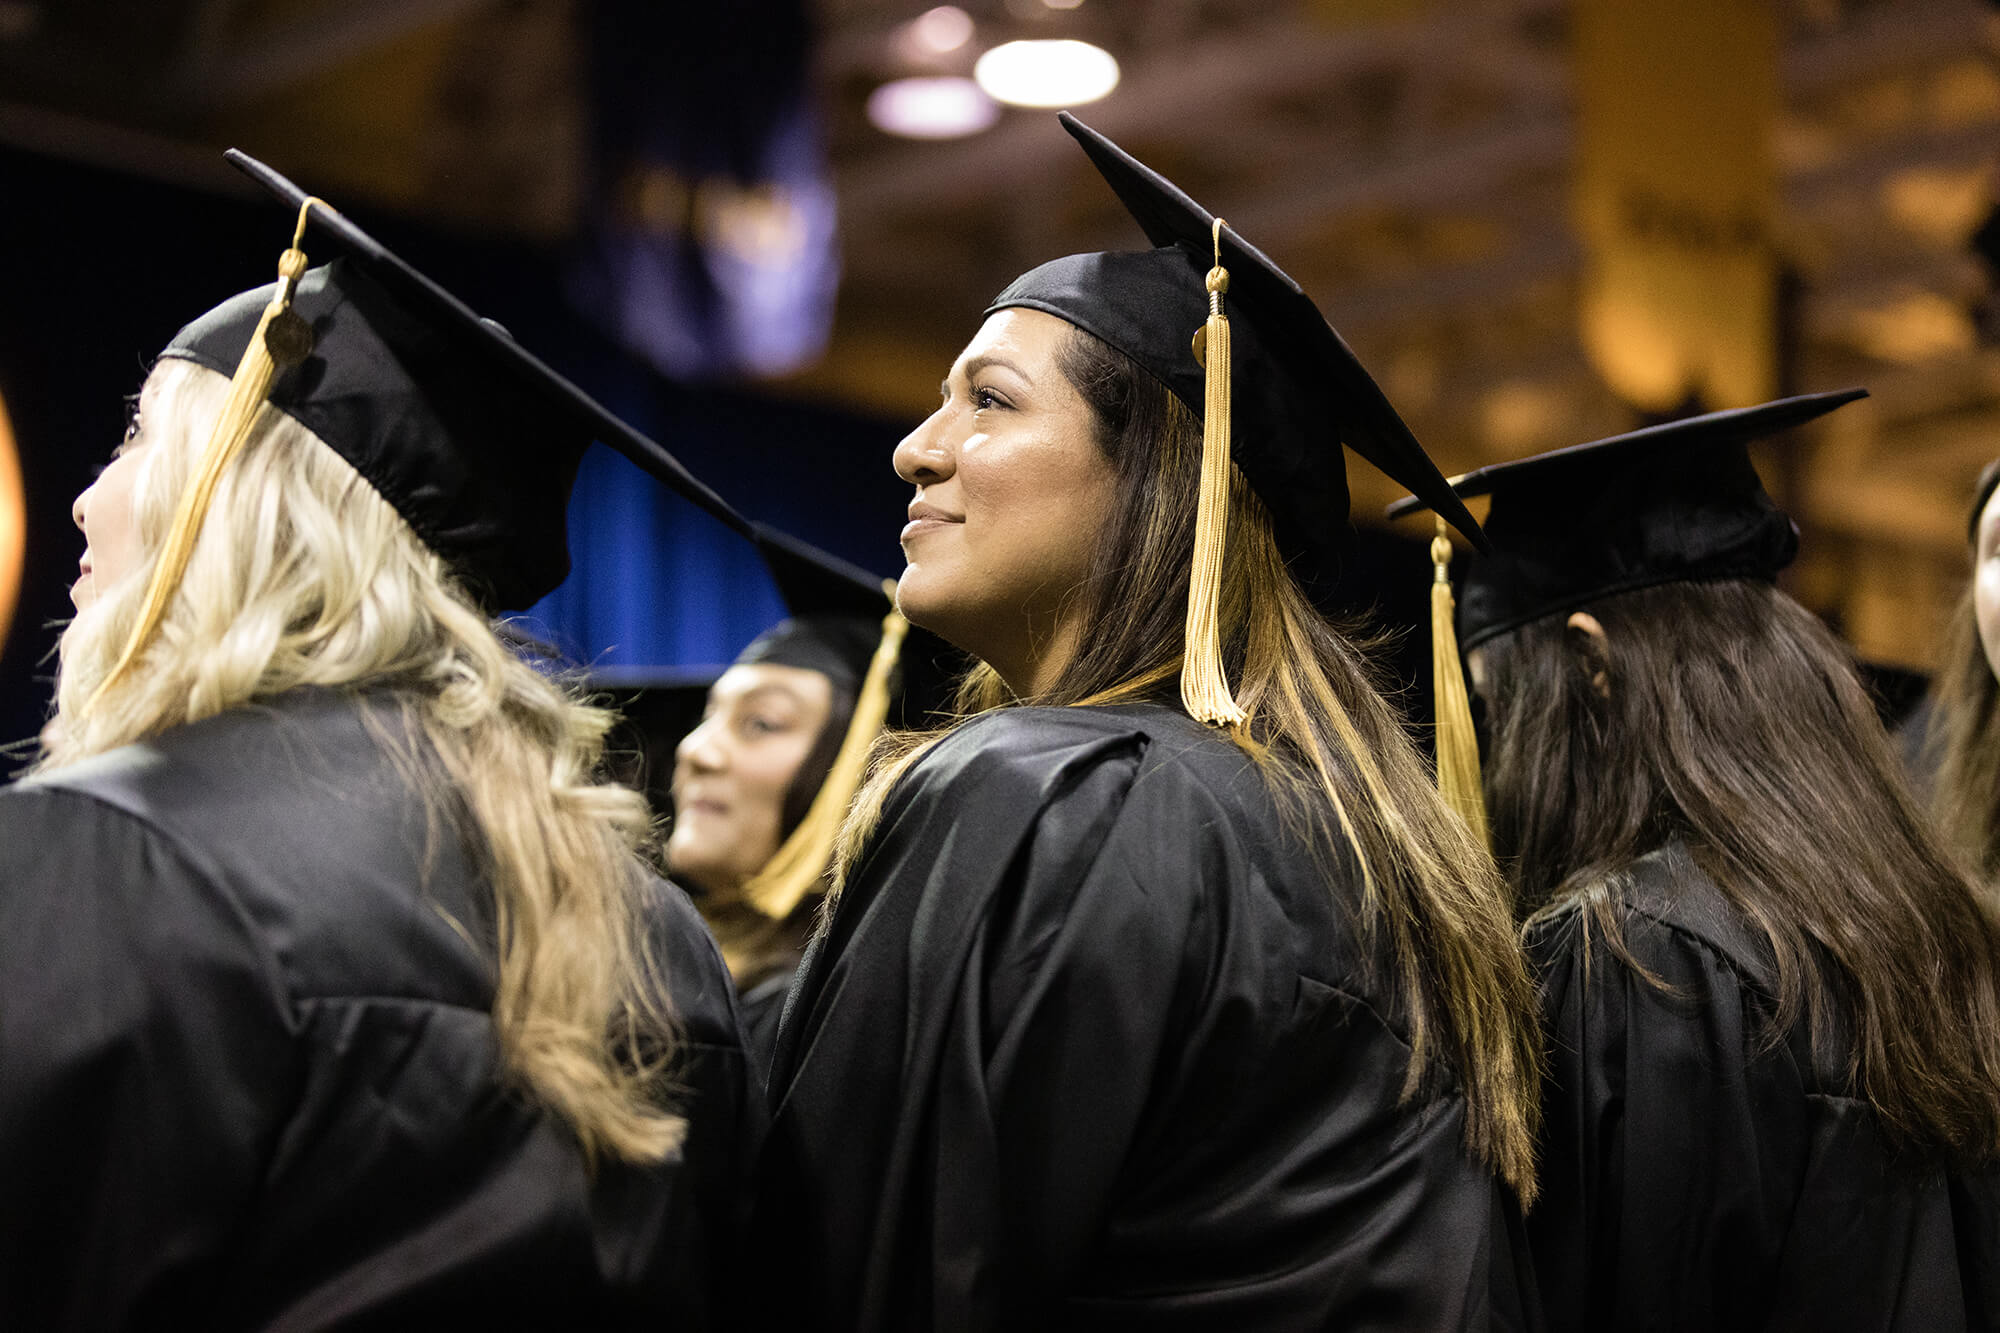 A graduate smiles at her family in the crowd during a commencement ceremony.